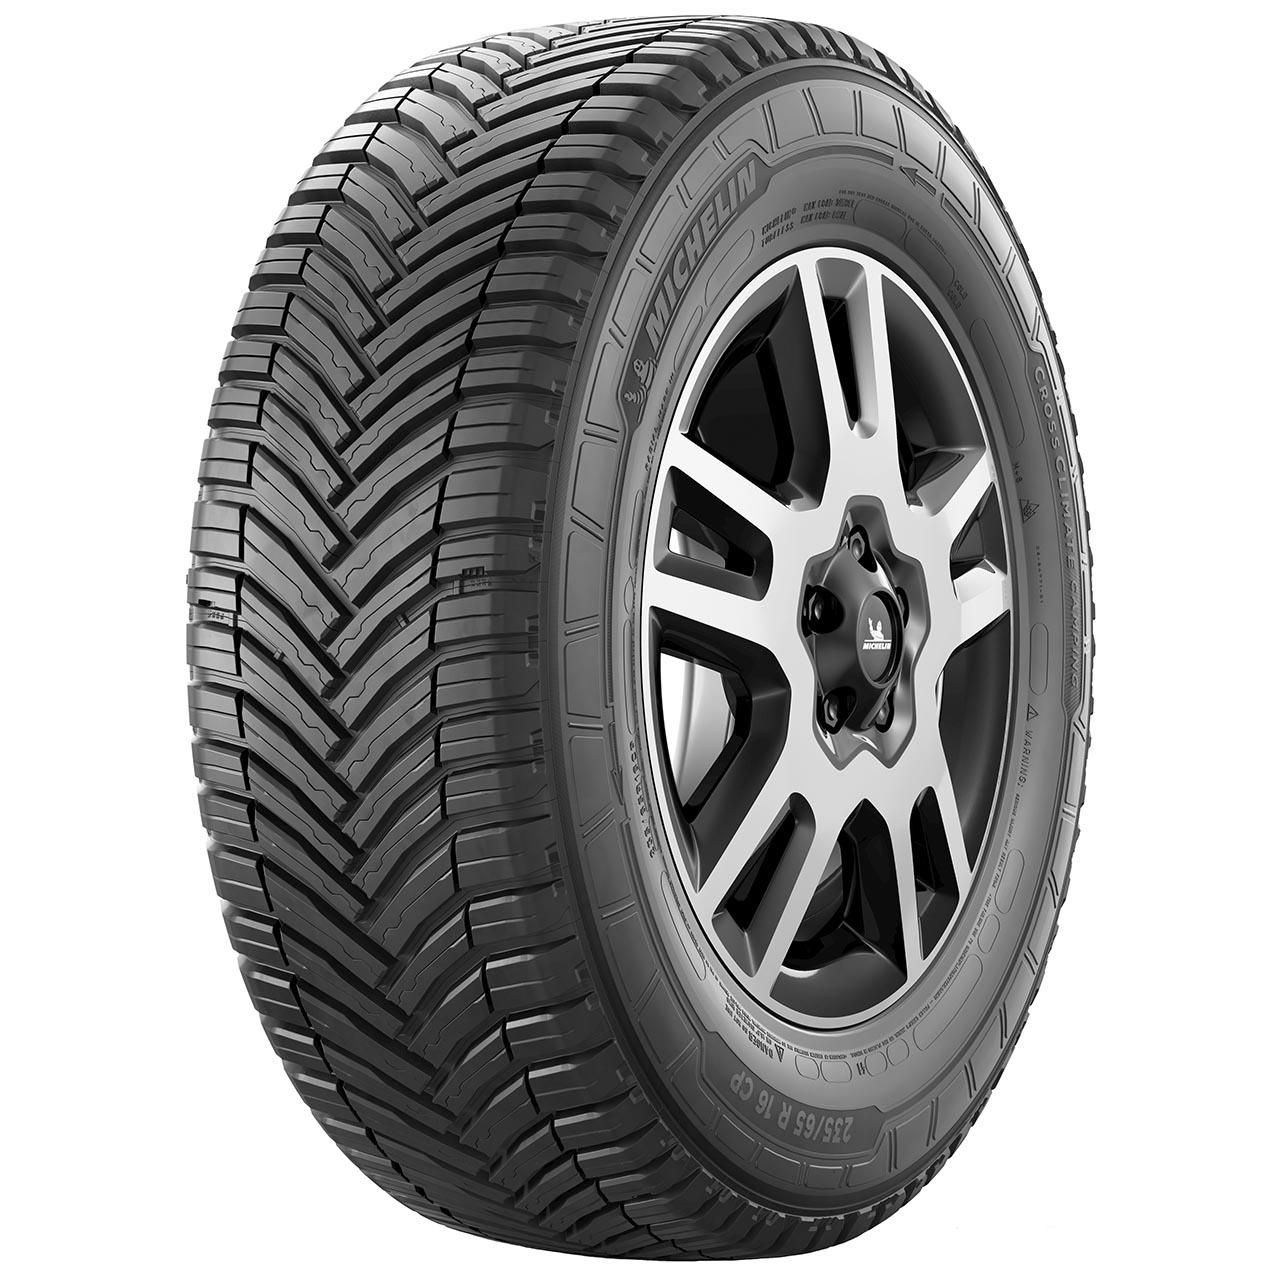 MICHELIN CROSSCLIMATE CAMPING 225/65 R16 112/110R 110 TL M+S 3PMSF